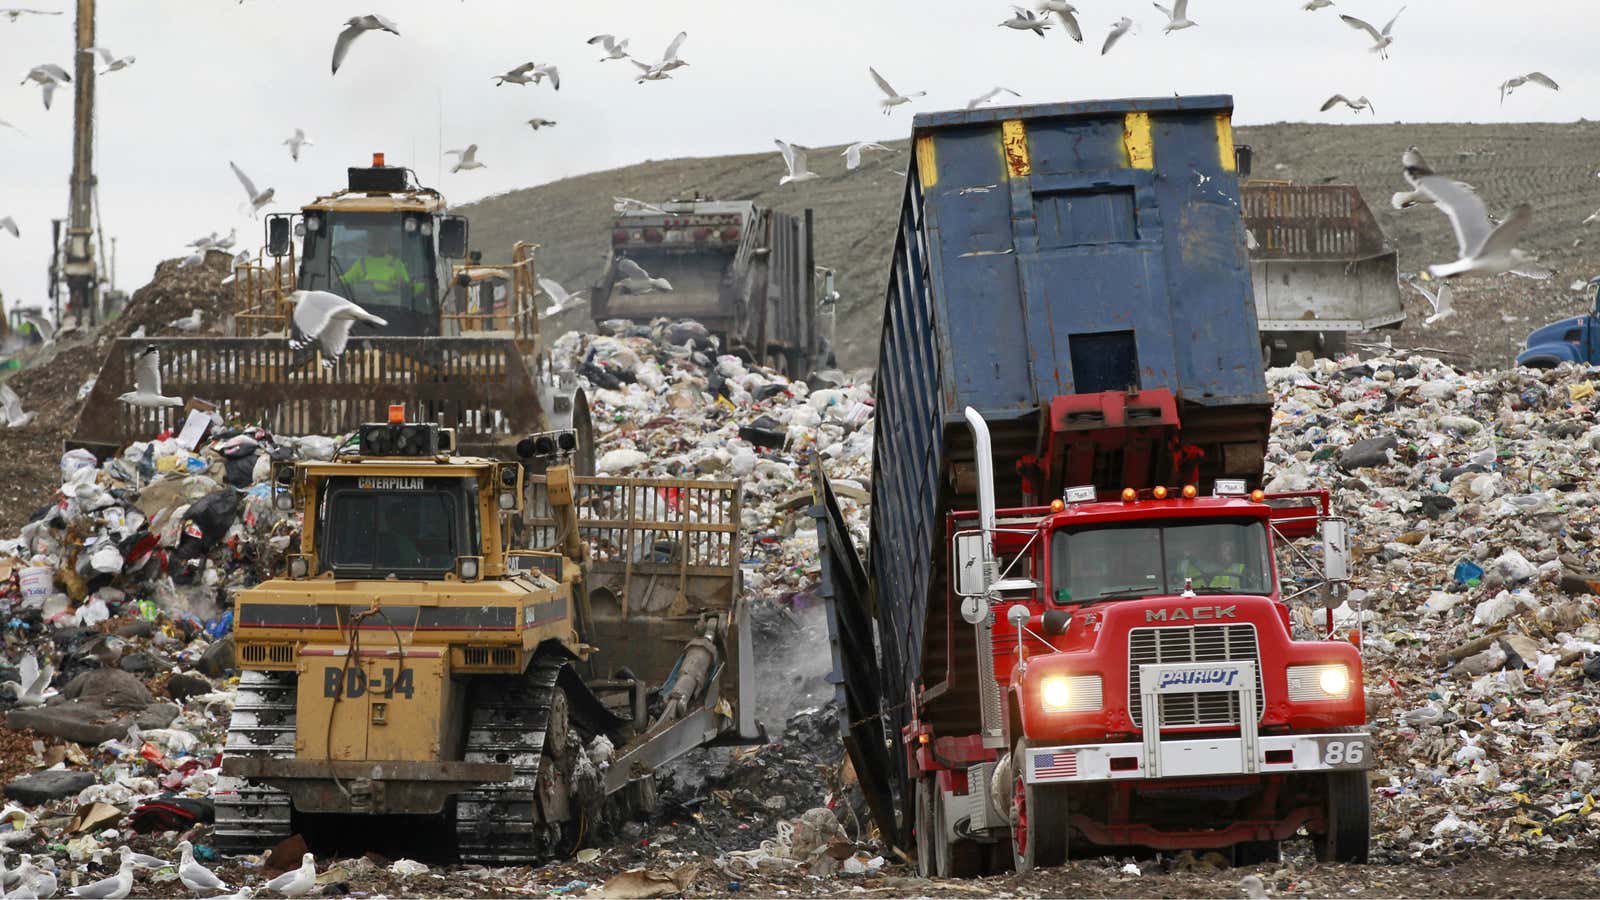 A whopping 40% of food in America ends up in a landfill.